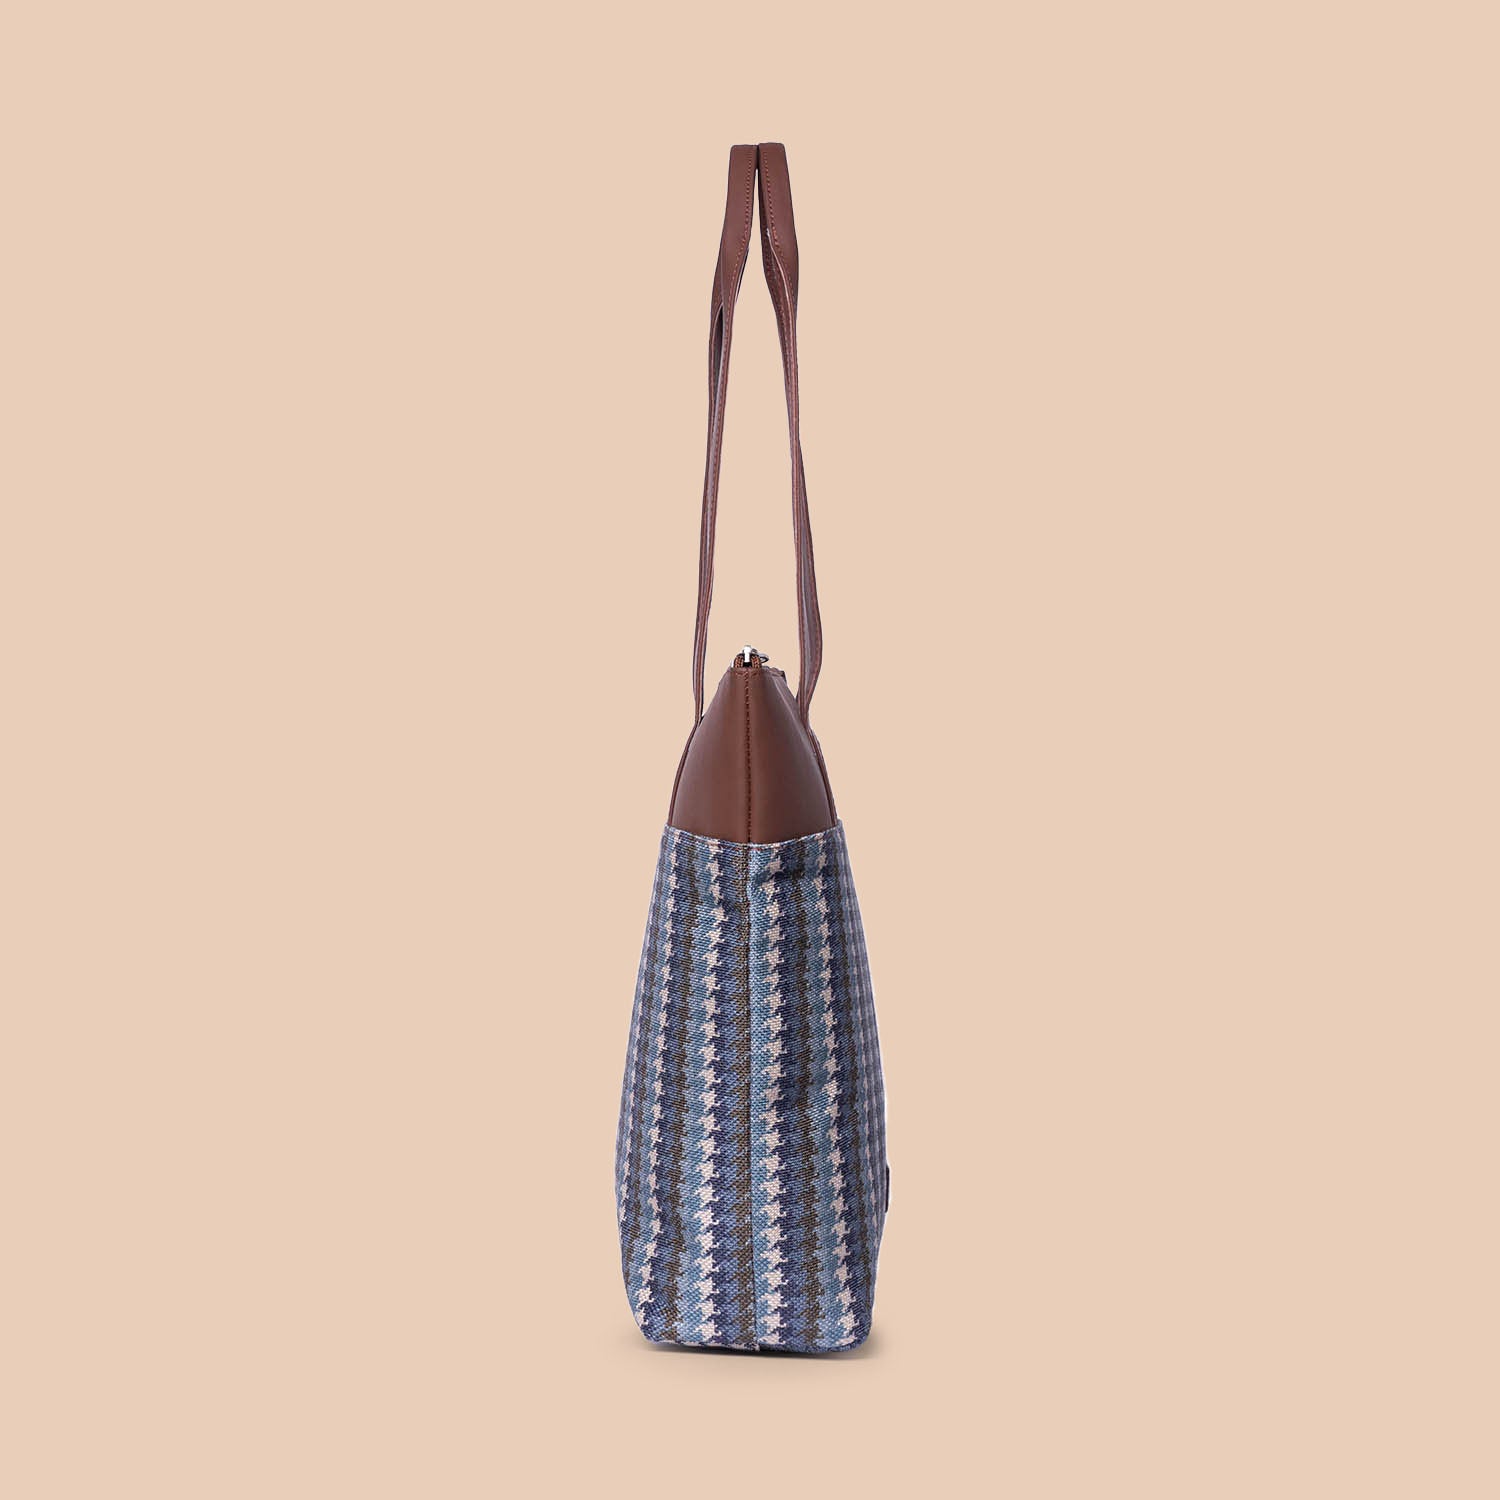 Bombay Houndstooth Everyday Tote Bag